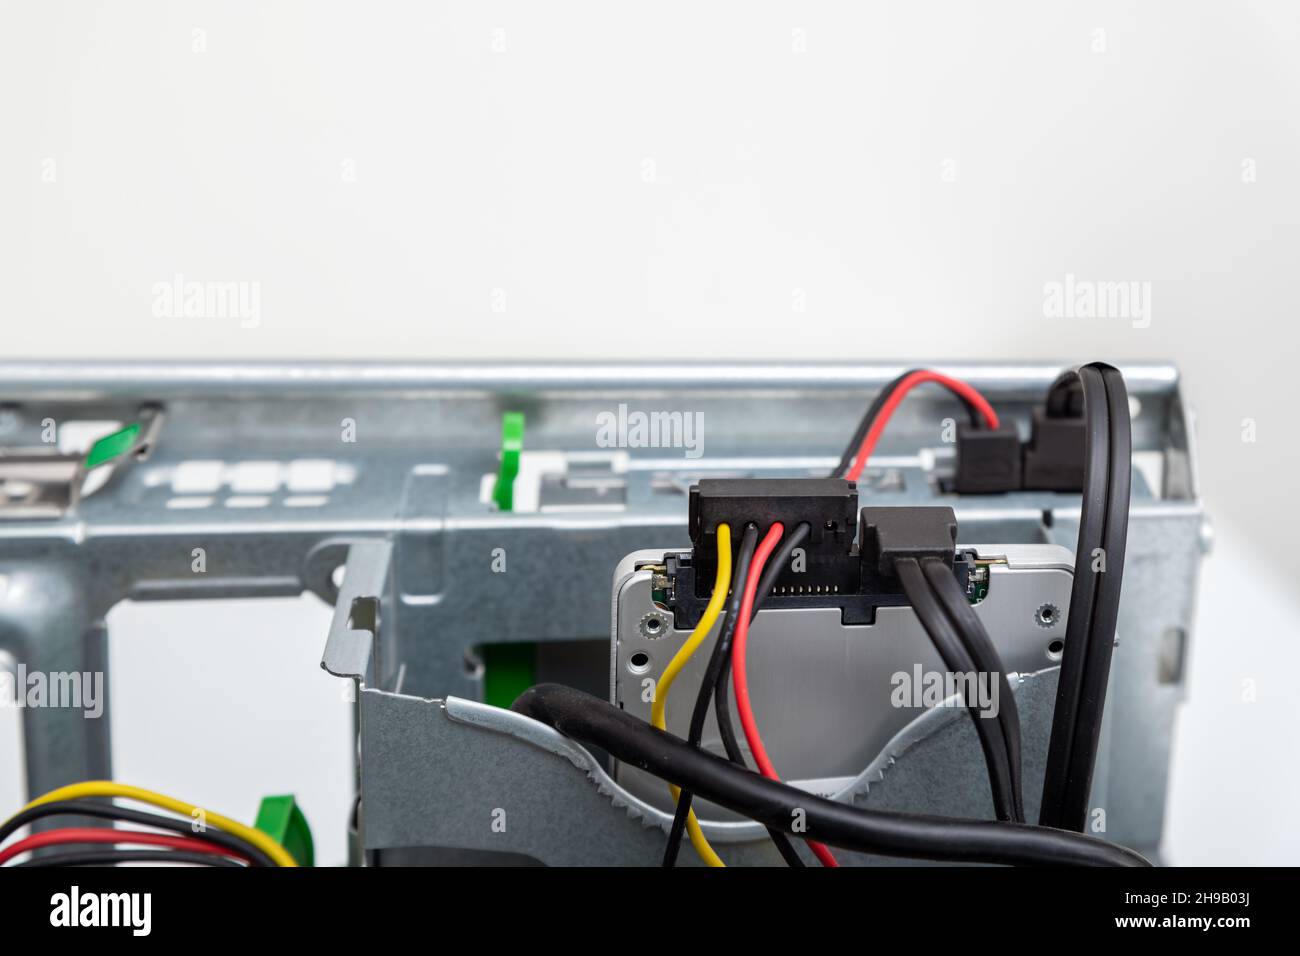 Closed-up view of SSD Hard disk drive with connectors inside of business desktop PC Stock Photo